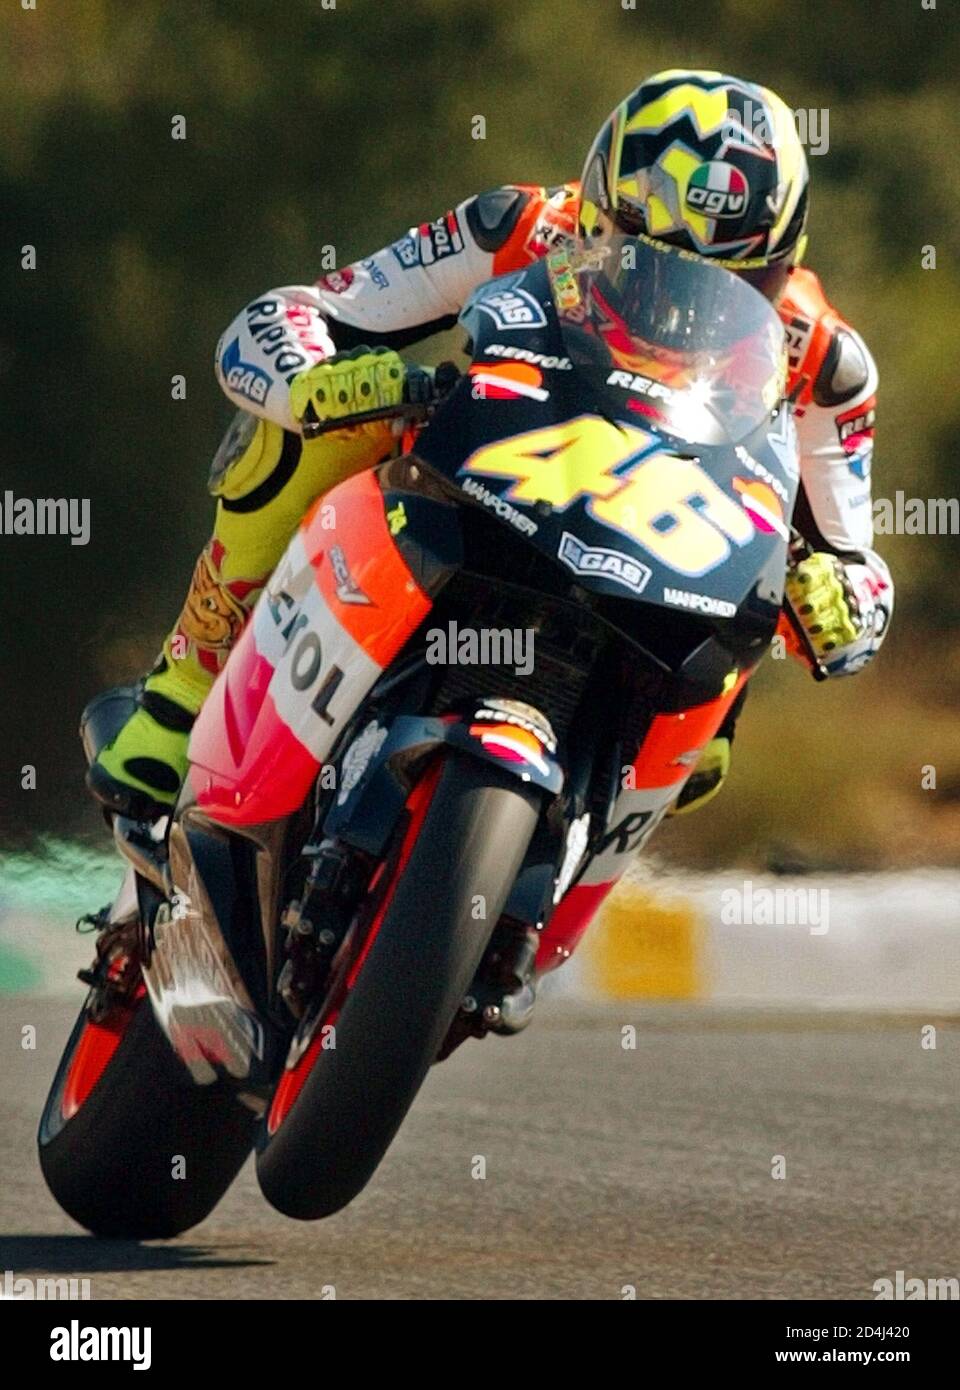 Italian rider Valentino Rossi on a Honda GP motorbike comes out from a  curve during the first free practice session at the Estoril circuit in  Portugal September 5, 2003. Valentino Rossi clocked